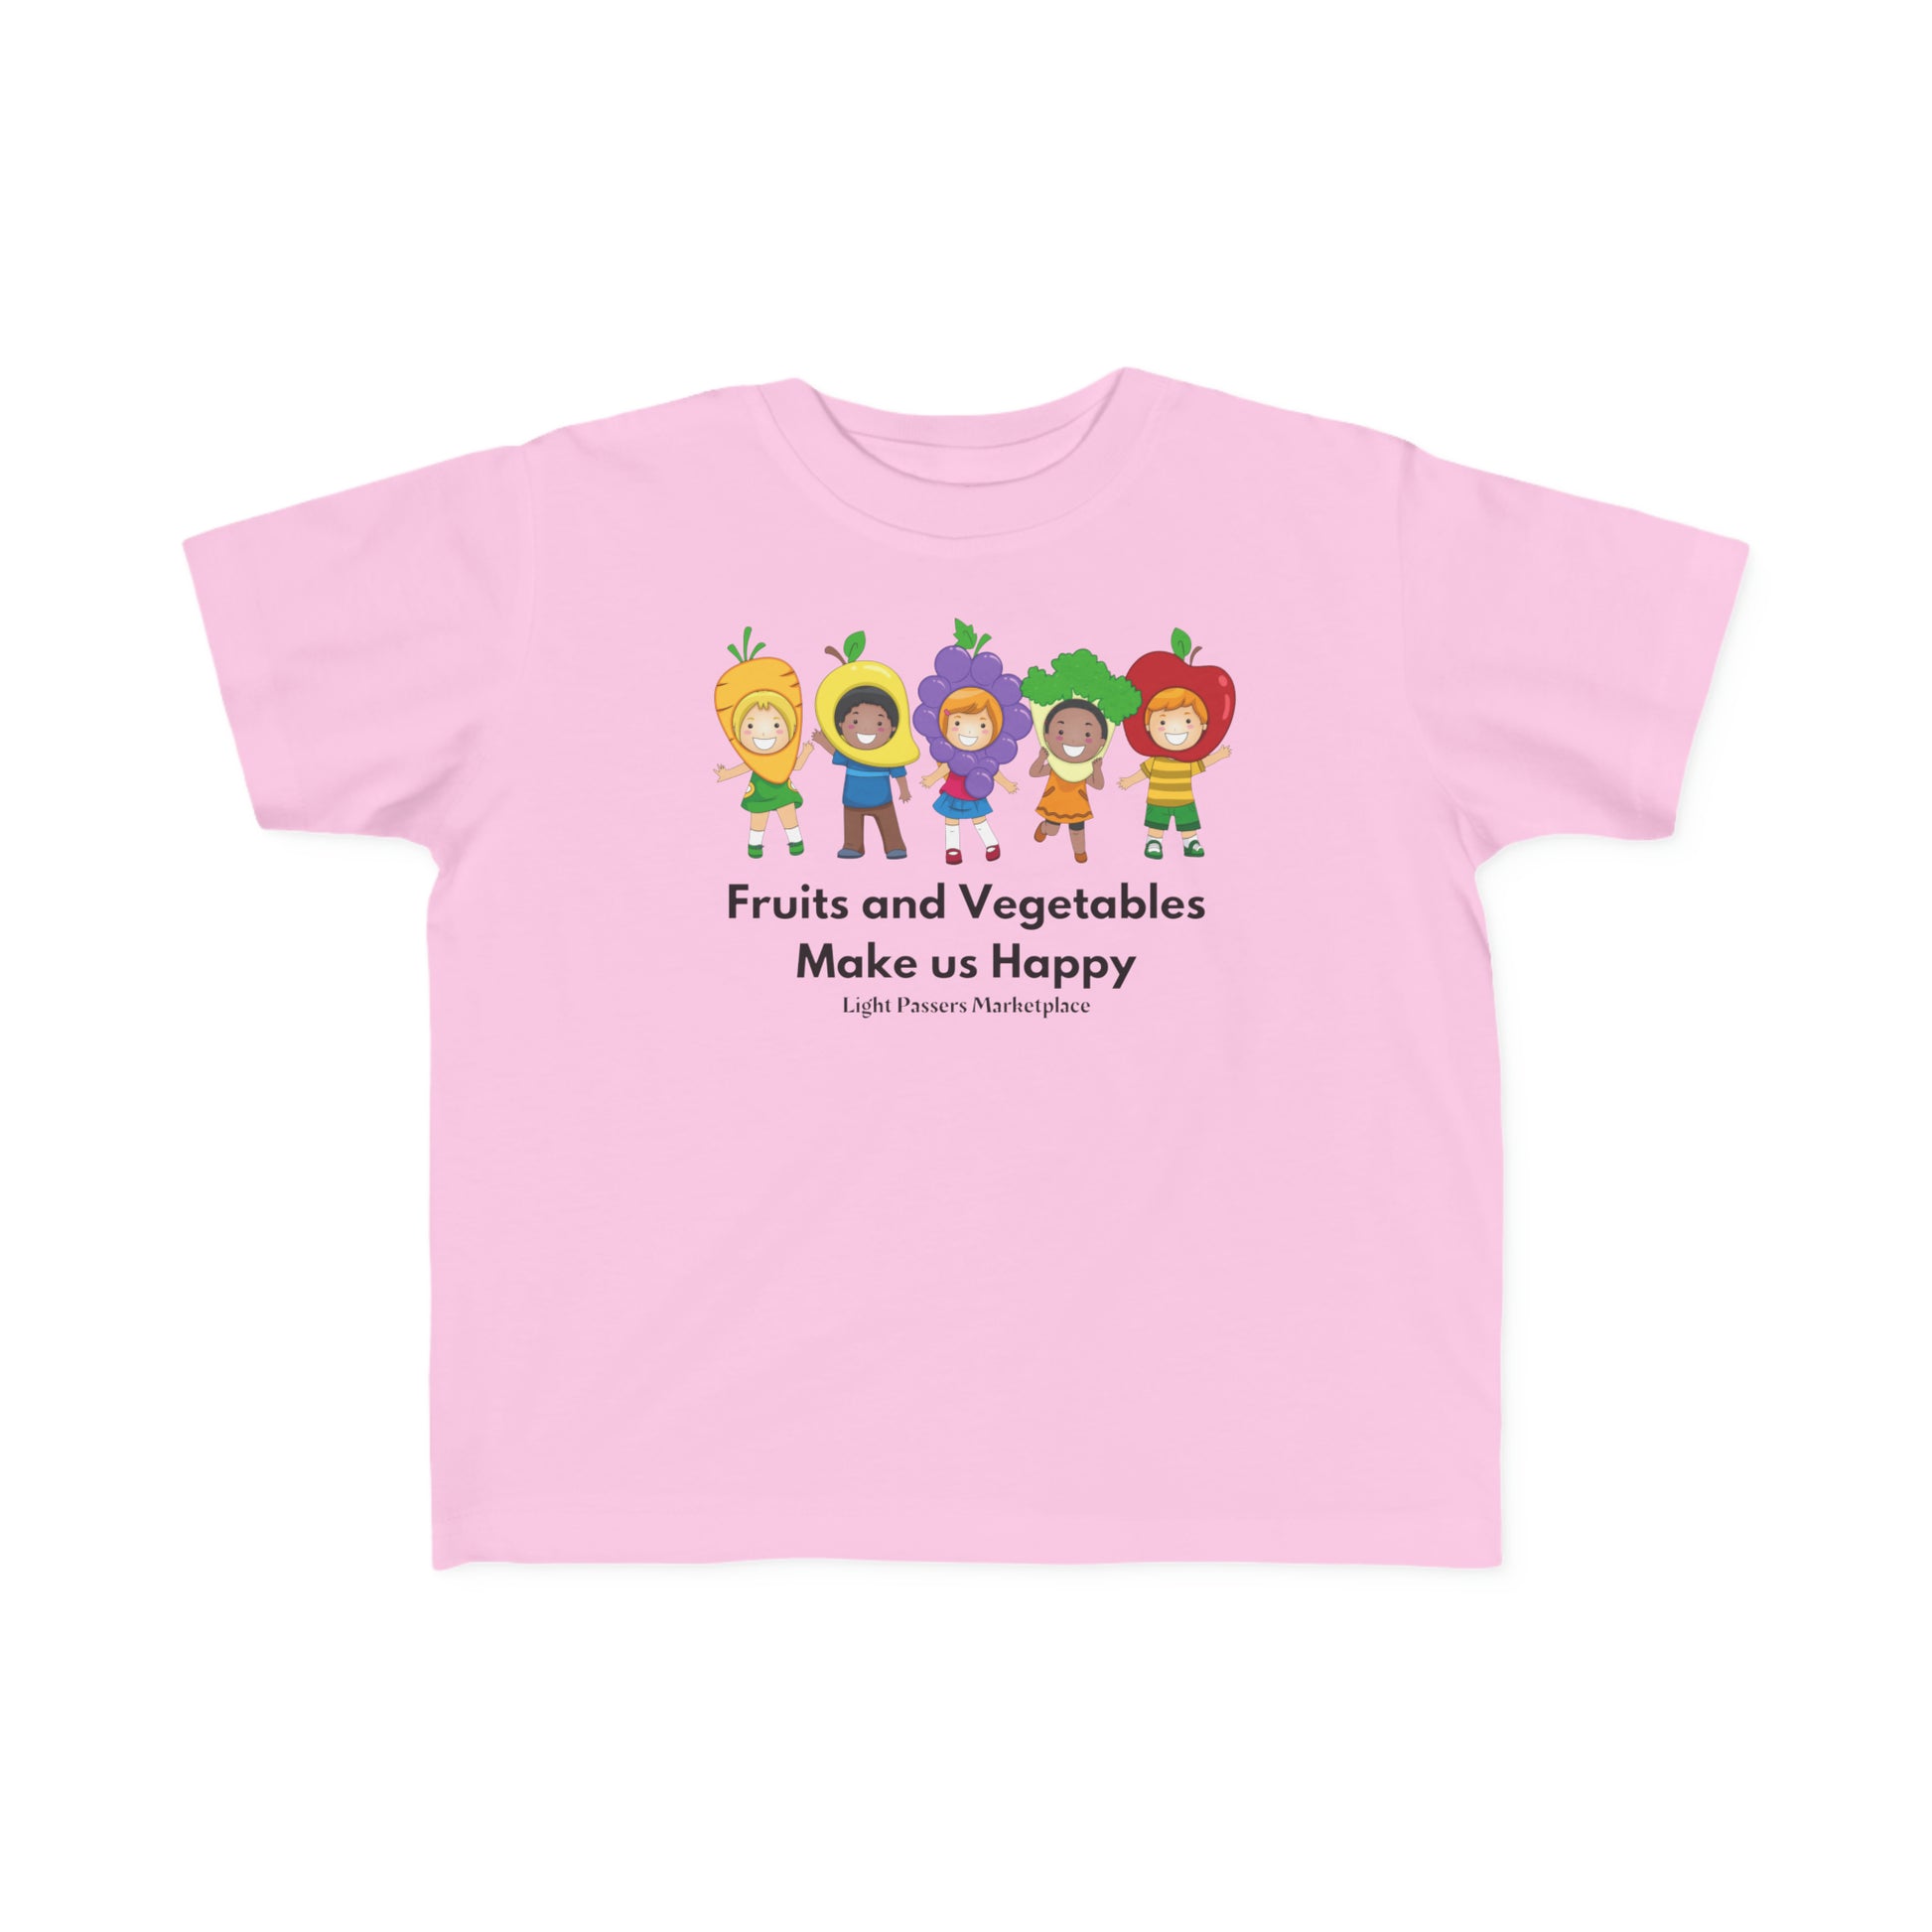 A toddler's tee featuring cartoon characters in fruit and vegetable outfits. Soft, 100% combed cotton, durable print, tear-away label, classic fit, 4.5 oz/yd² fabric. Perfect for sensitive skin.